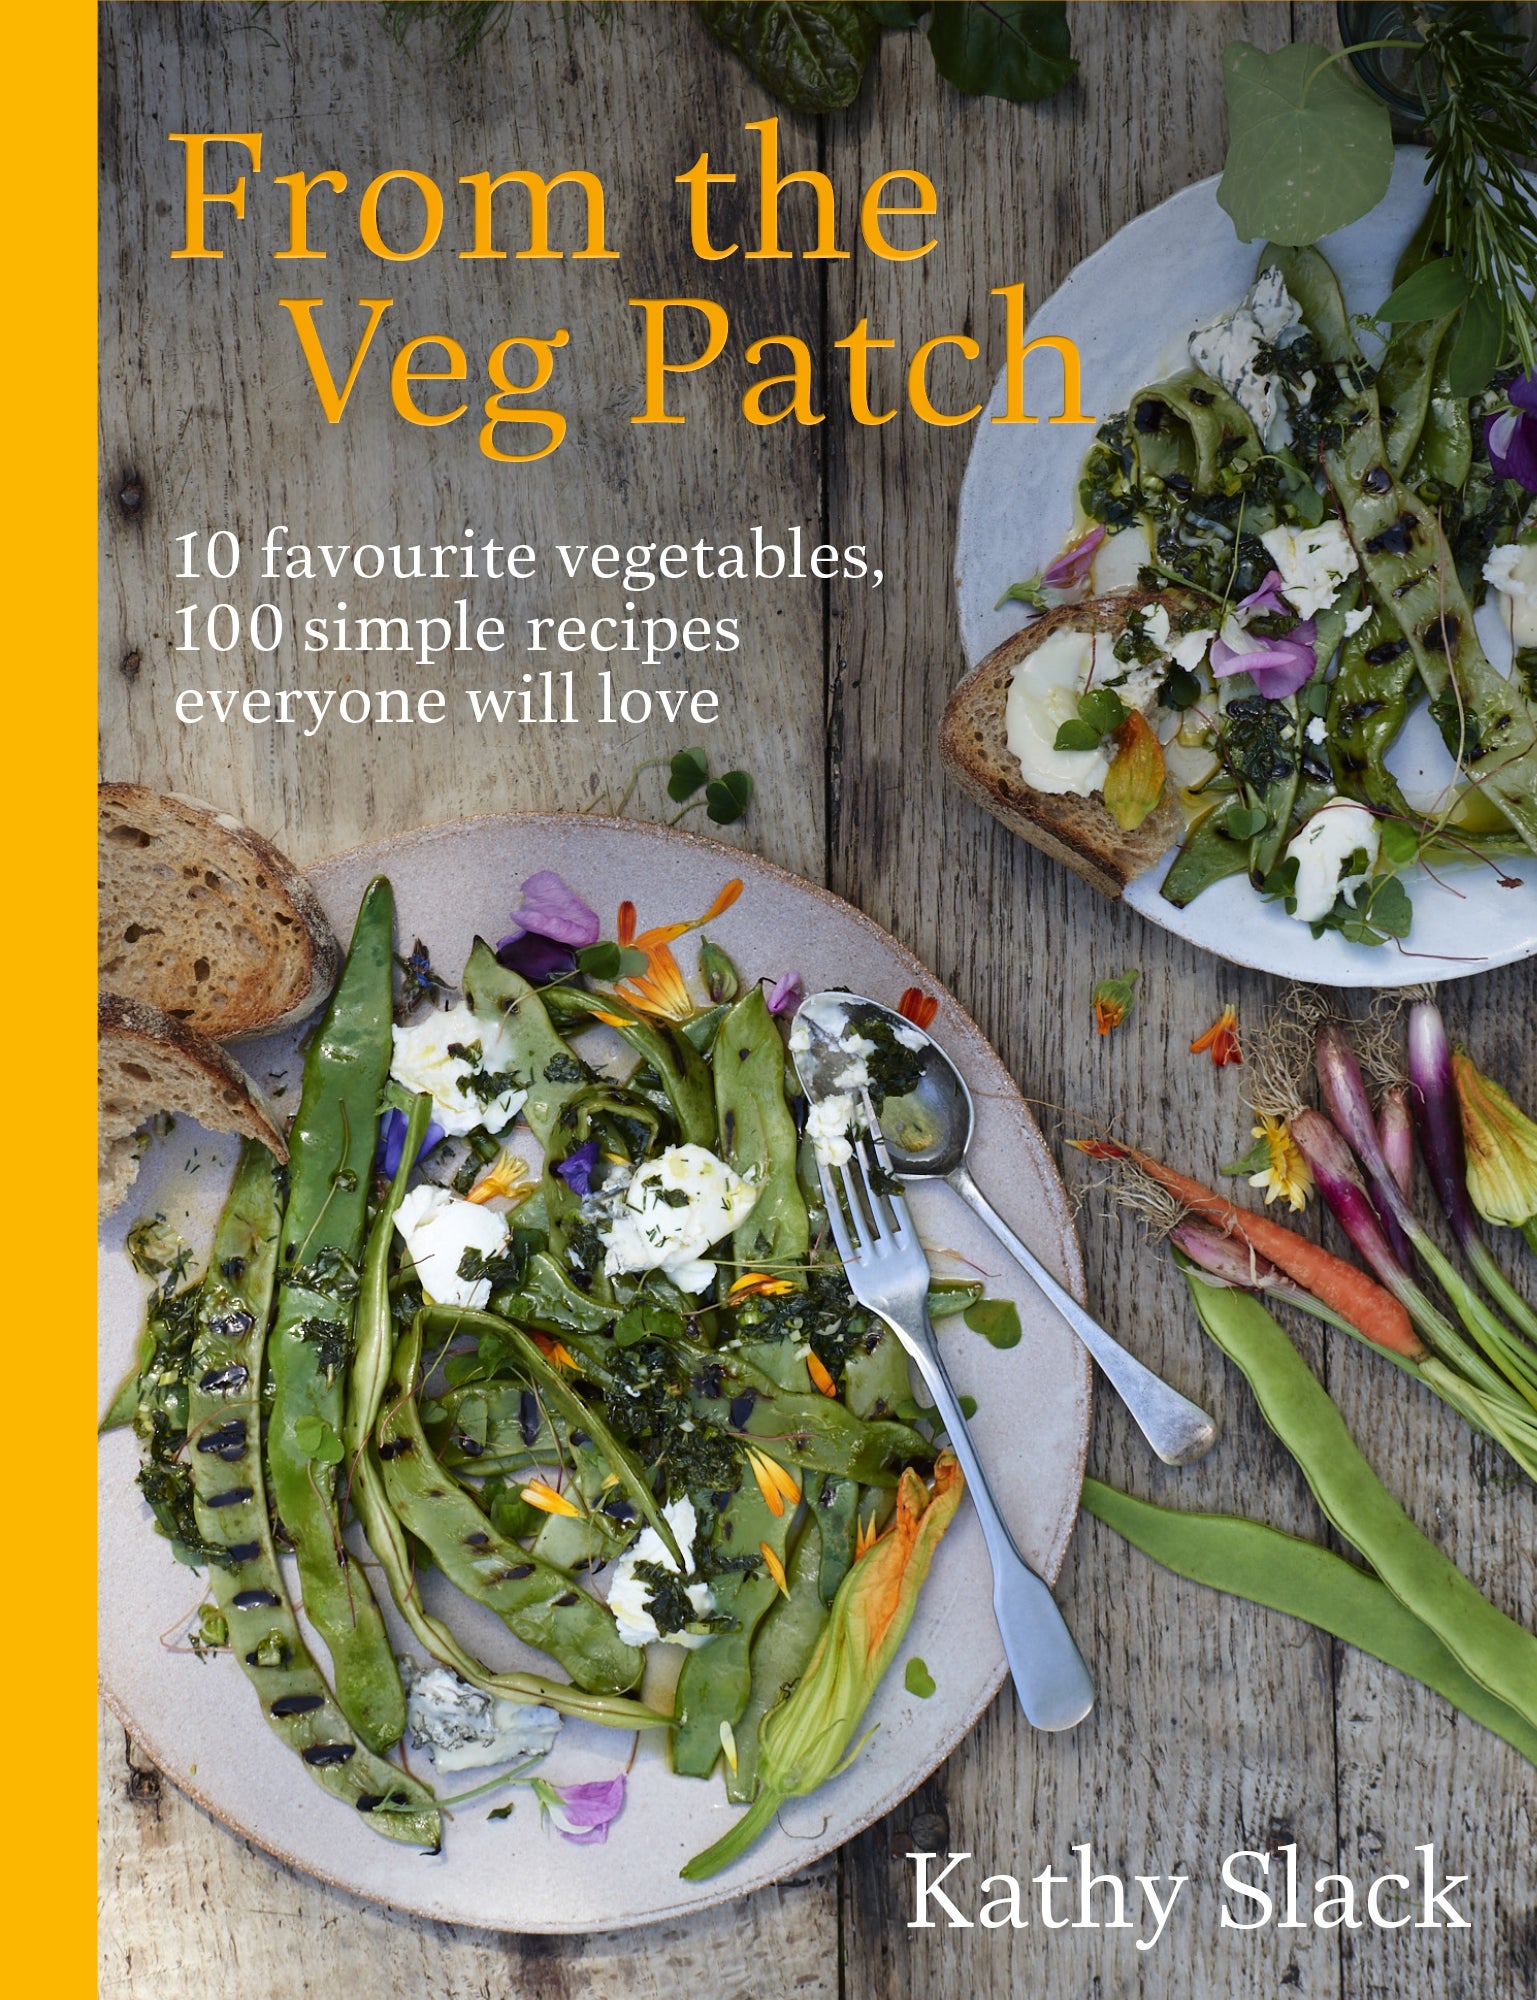 ‘From the Veg Patch’ was shortlisted for a Guild of Food Writers award this year